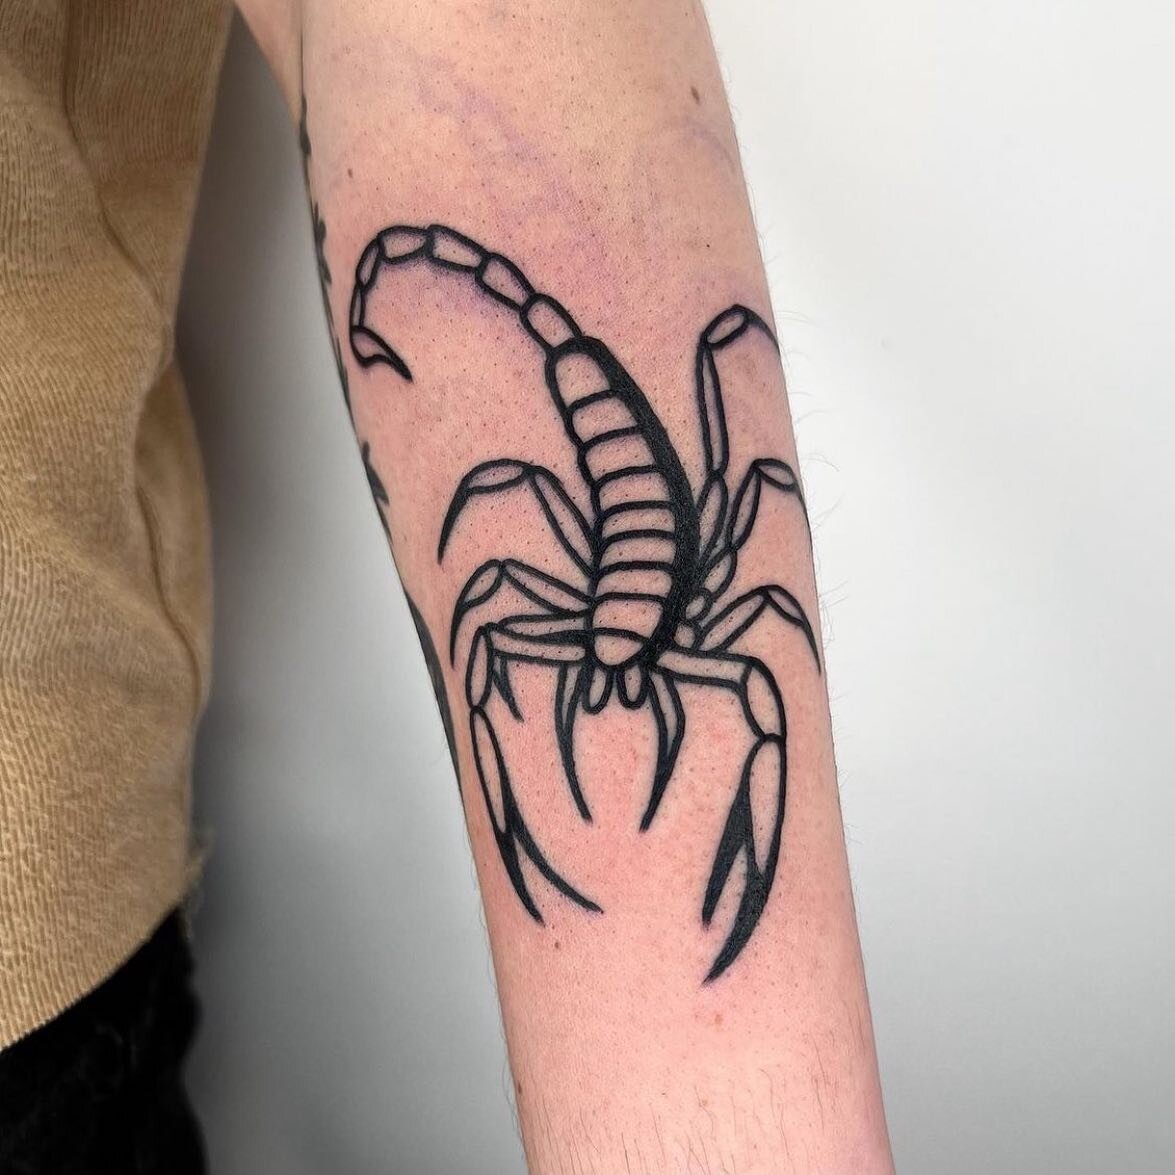 𝑺𝒕𝒊𝒏𝒈𝒆𝒓𝒔 🦂🦂 Custom matching tattoos for friends by resident Taylor Made 🤛